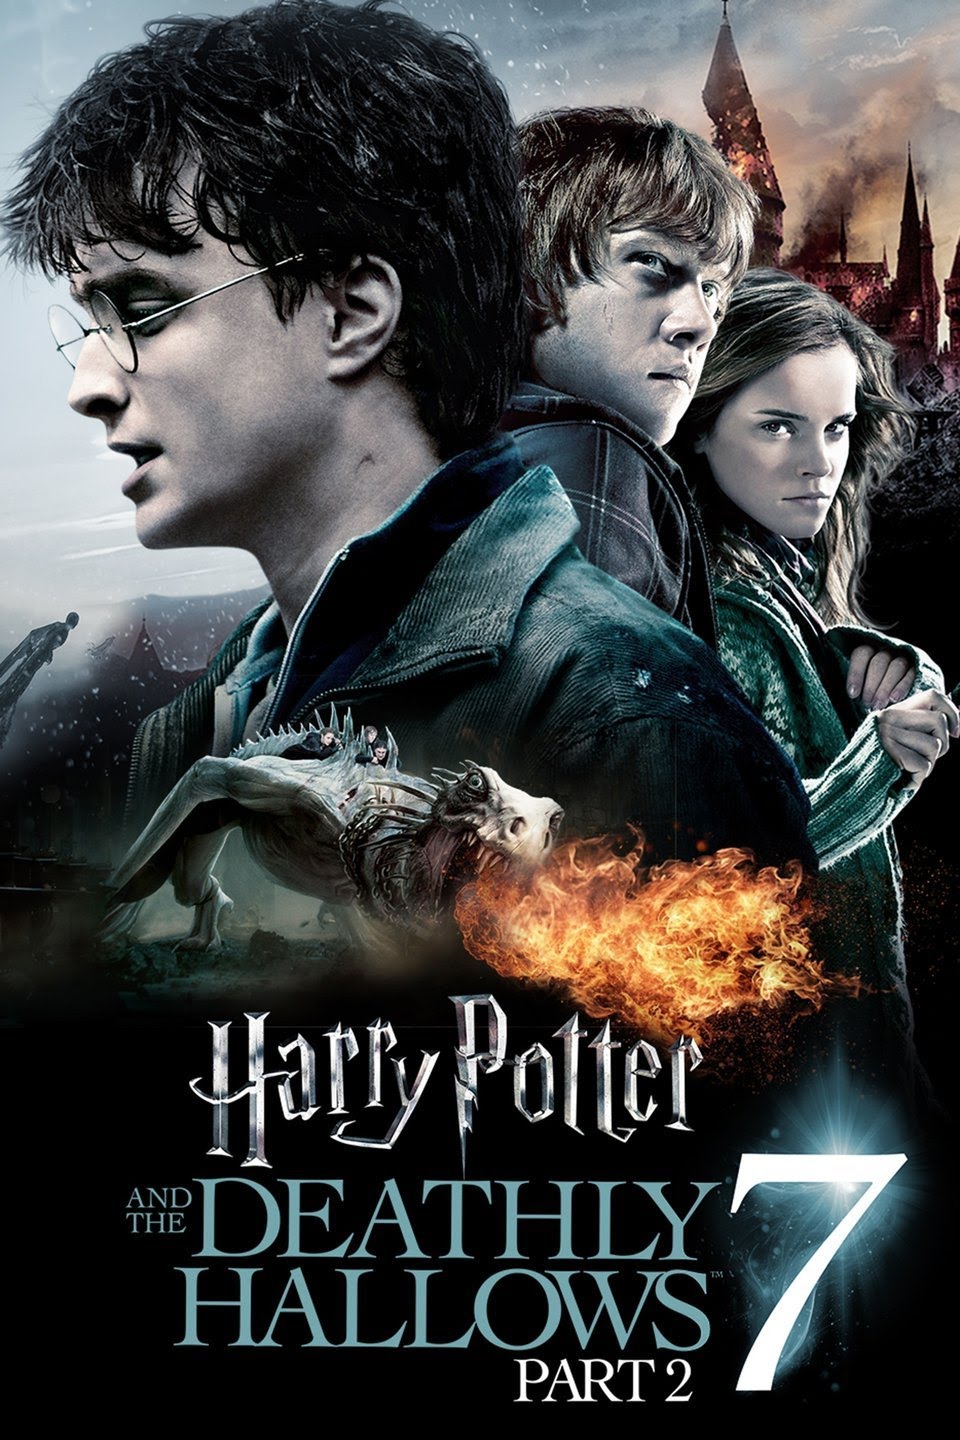 Harry Potter And The Deathly Hallows: Part 2 (2011) Vudu or Movies Anywhere HD code